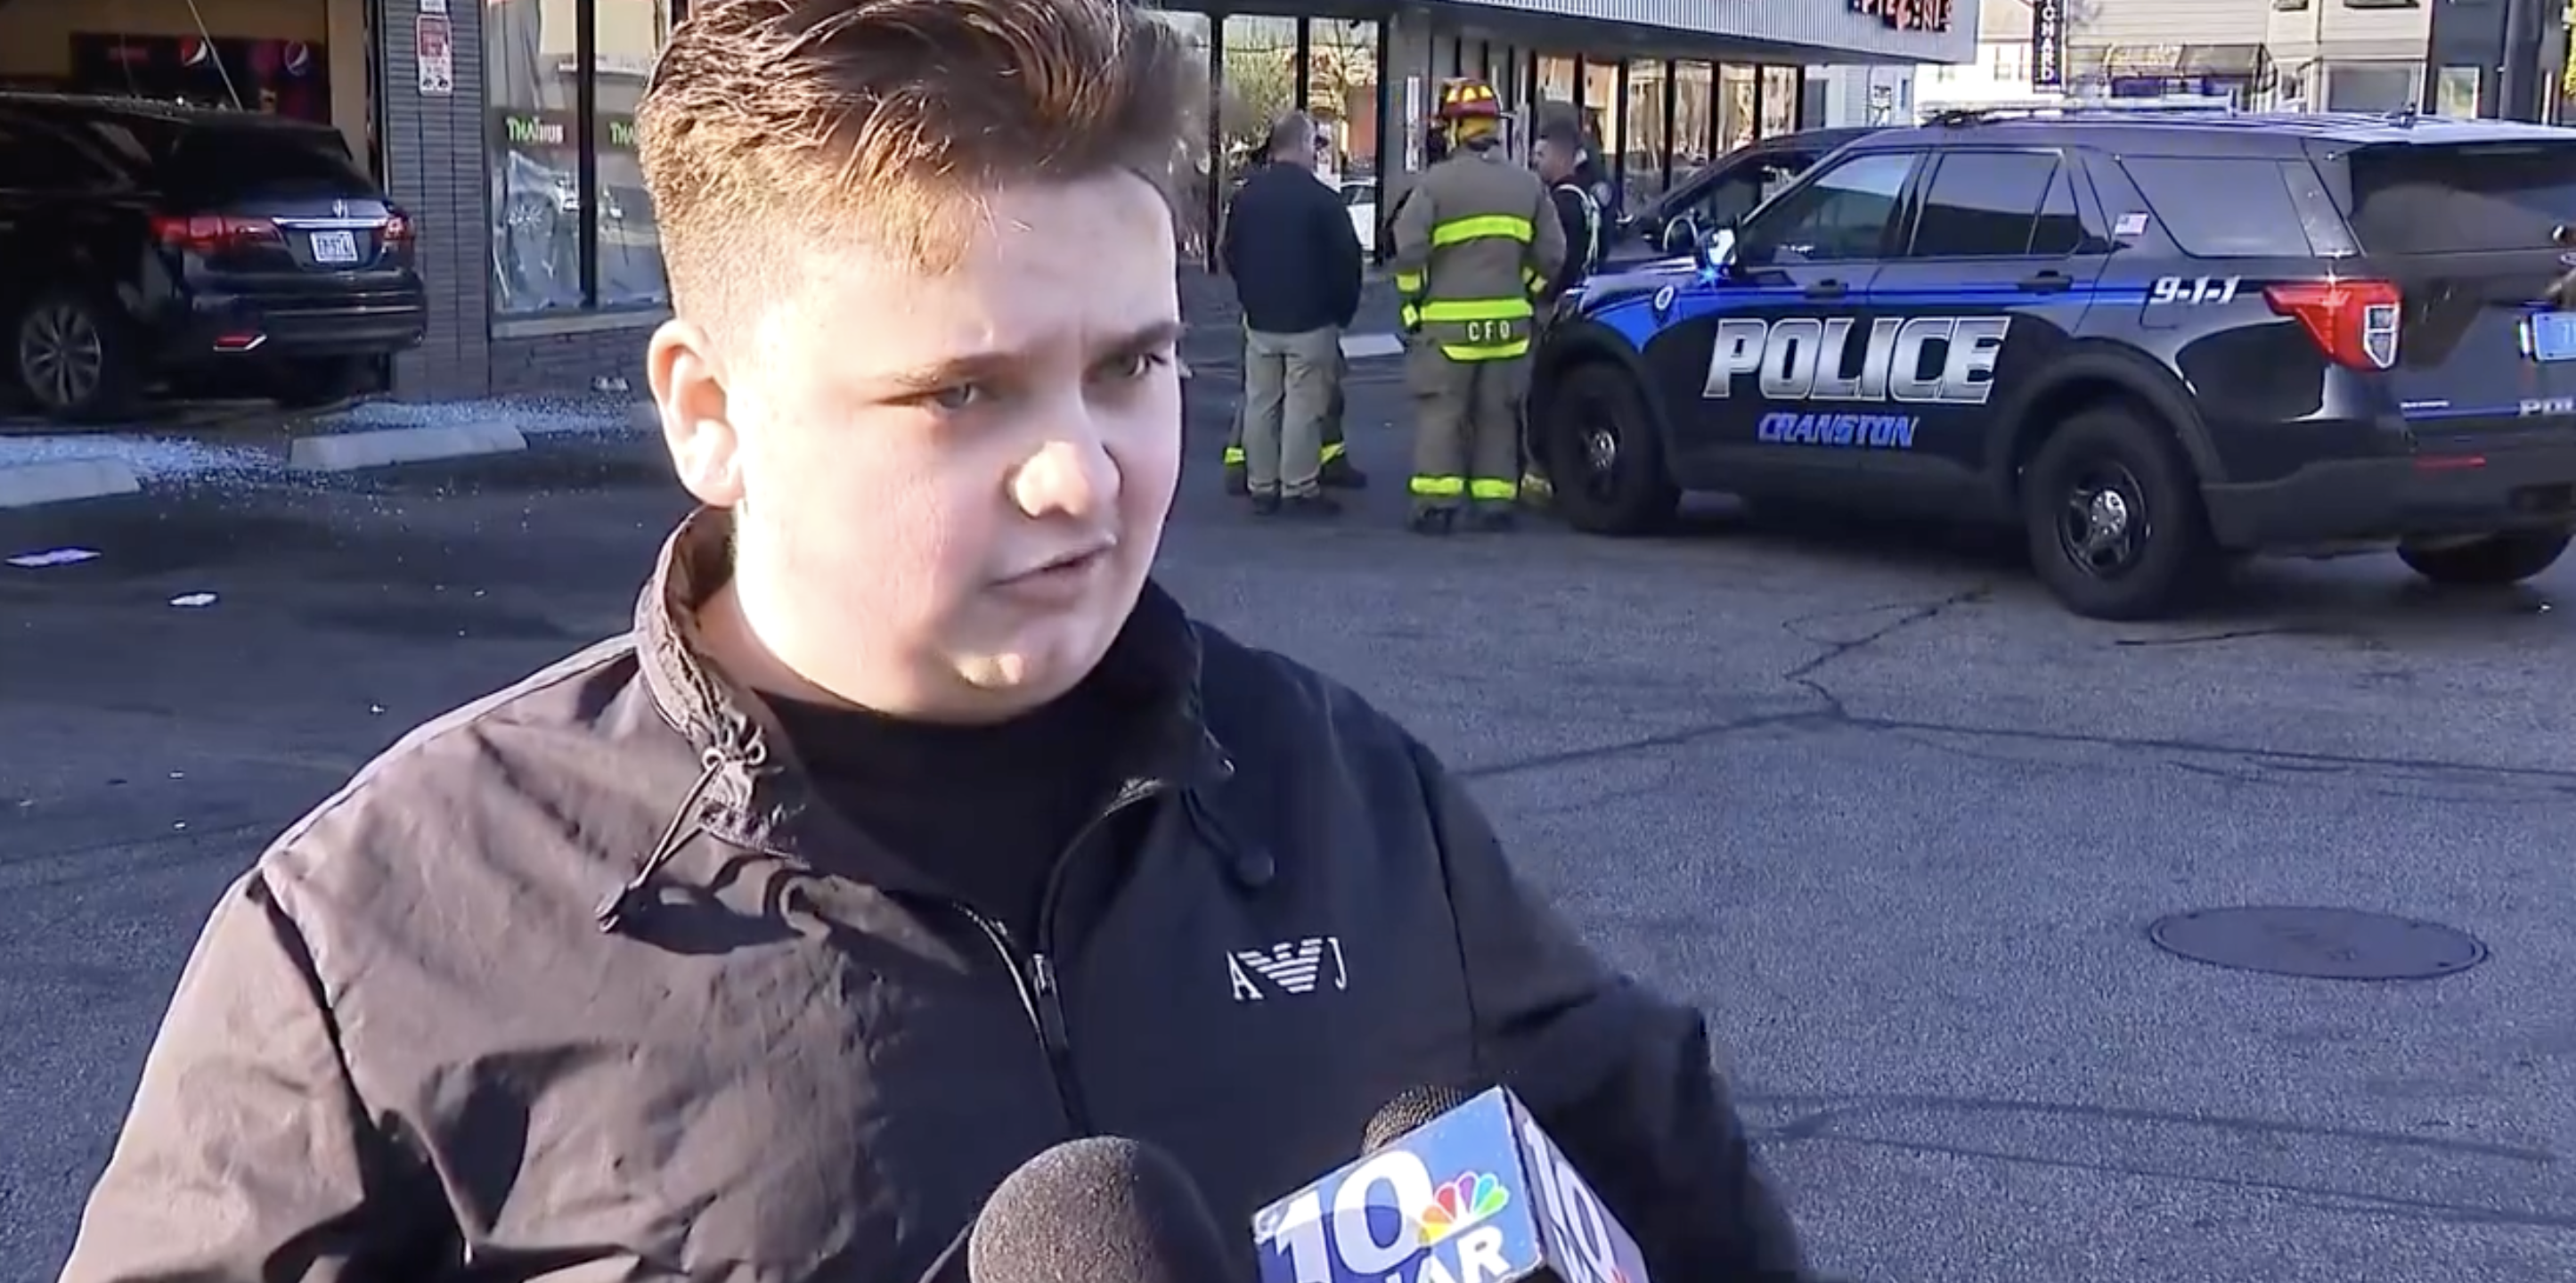 Person being interviewed by news crew with police and emergency vehicles in the background